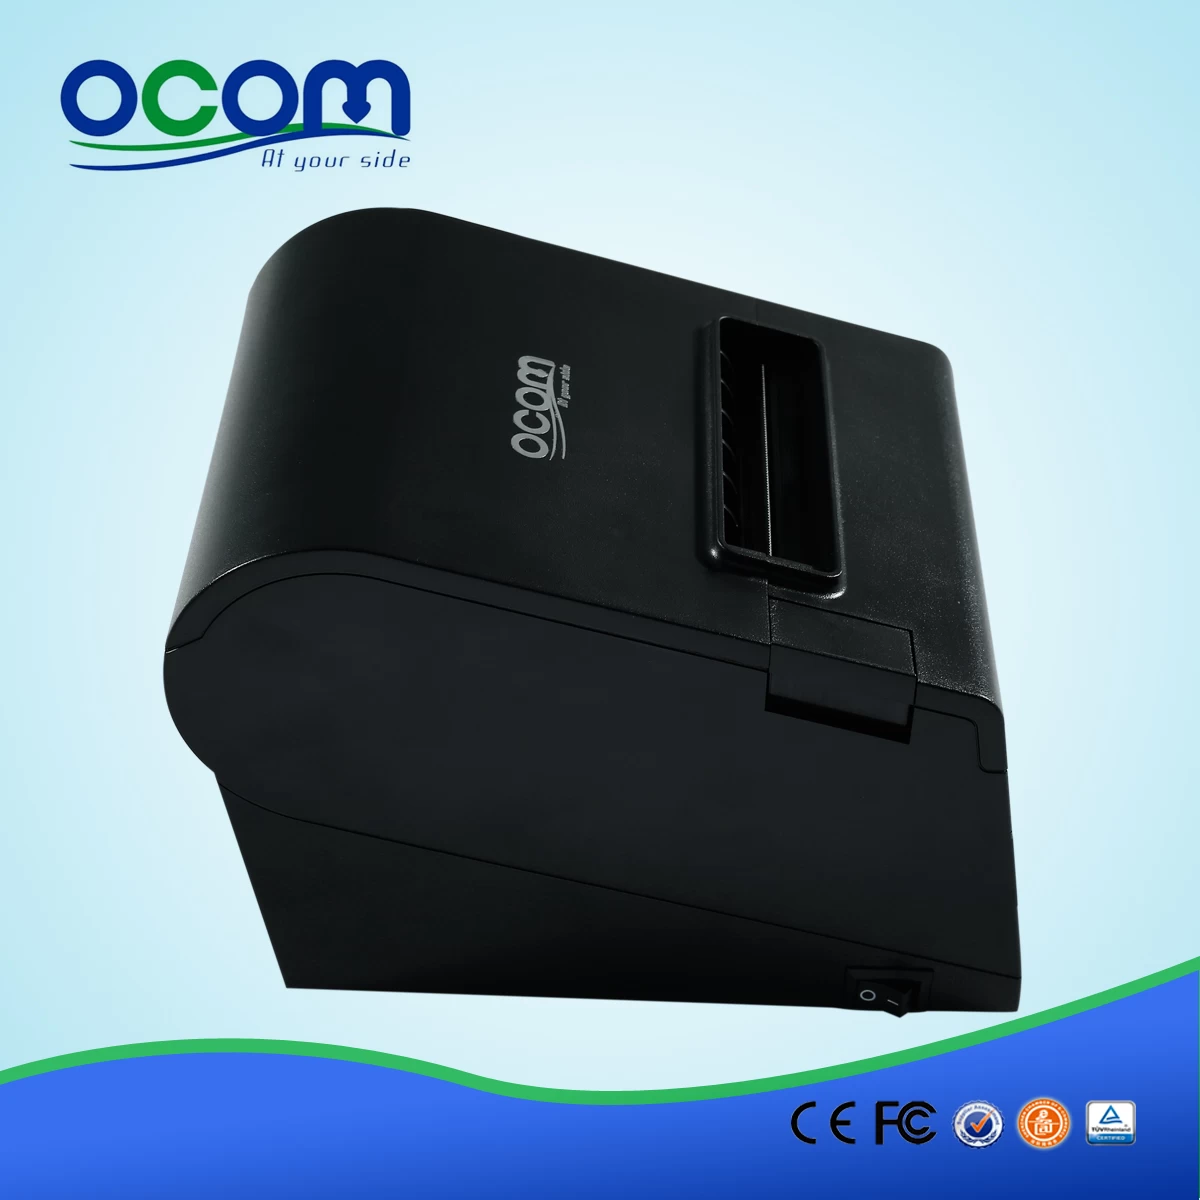 (OCPP-804) 80mm Auto-cutter With High Speed USB Thermal Receipt Printer